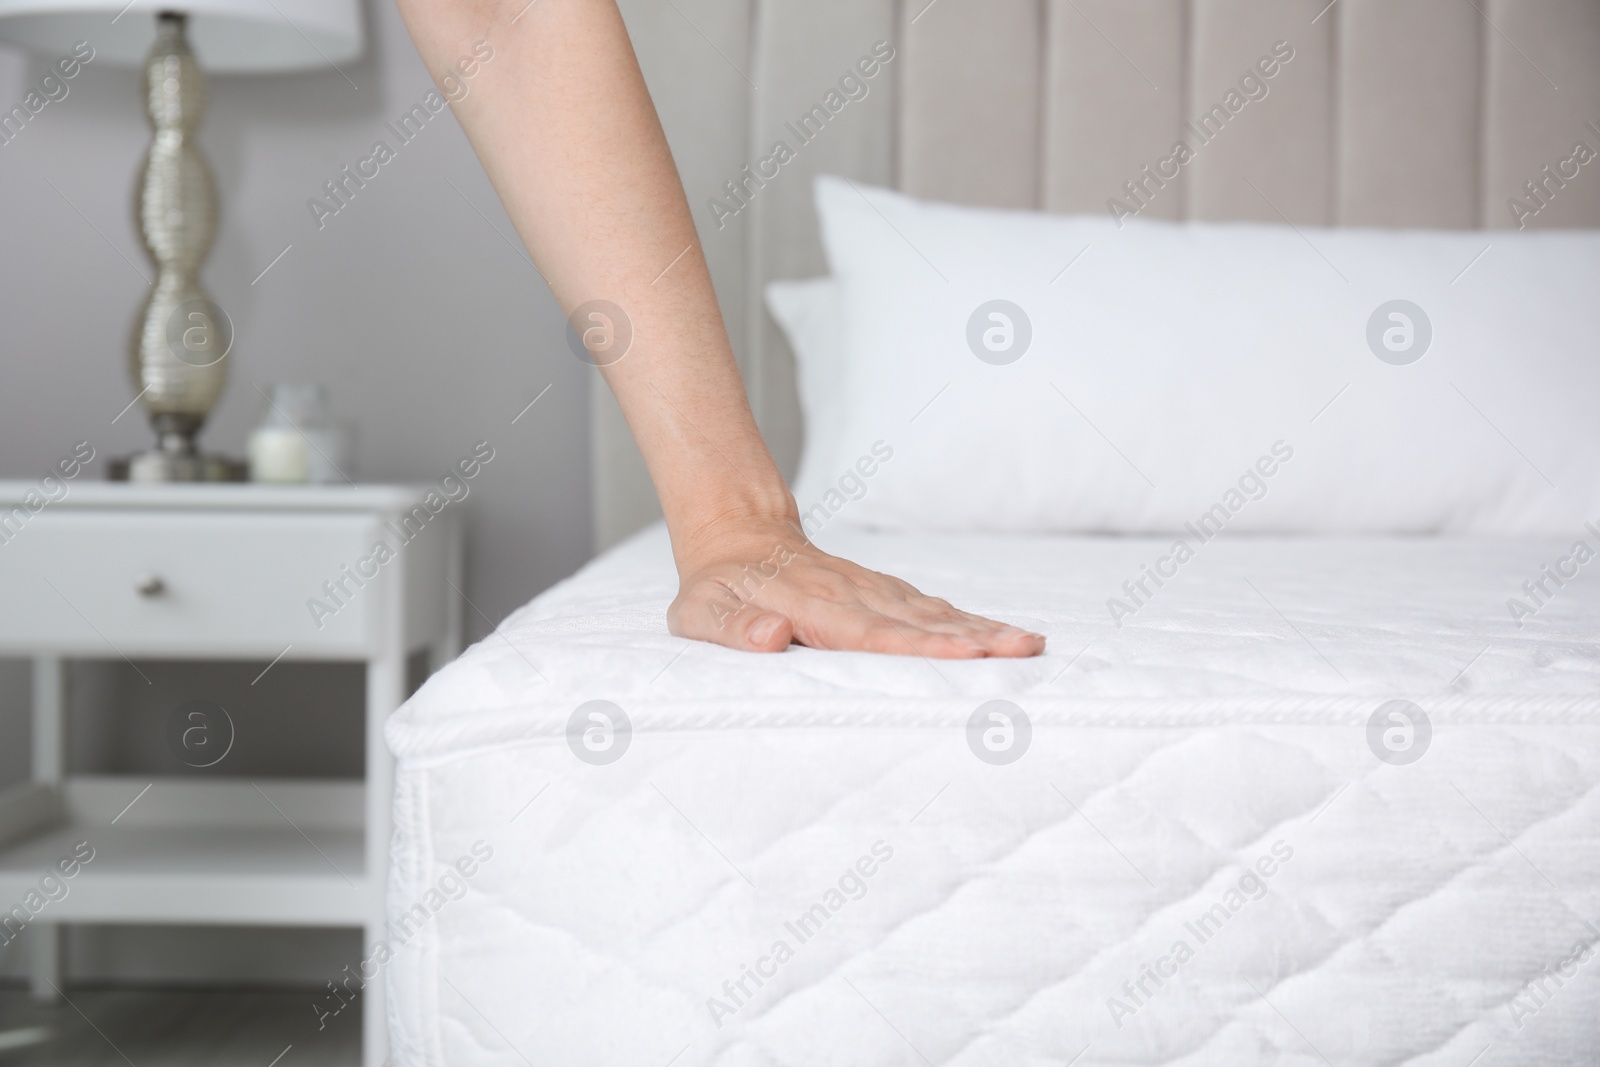 Photo of Woman touching soft white mattress on bed indoors, closeup